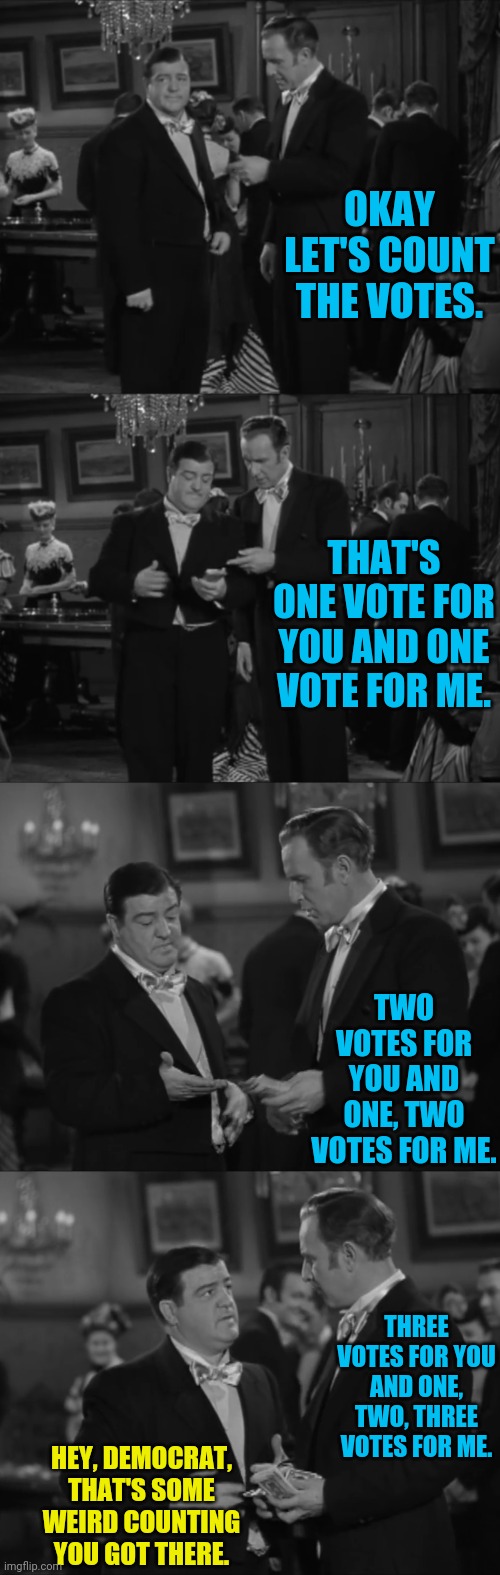 Democrats And Voter Fraud | OKAY LET'S COUNT THE VOTES. THAT'S ONE VOTE FOR YOU AND ONE VOTE FOR ME. TWO VOTES FOR YOU AND ONE, TWO VOTES FOR ME. THREE VOTES FOR YOU AN | image tagged in democrats,voting,political meme,politics,voter fraud,election fraud | made w/ Imgflip meme maker